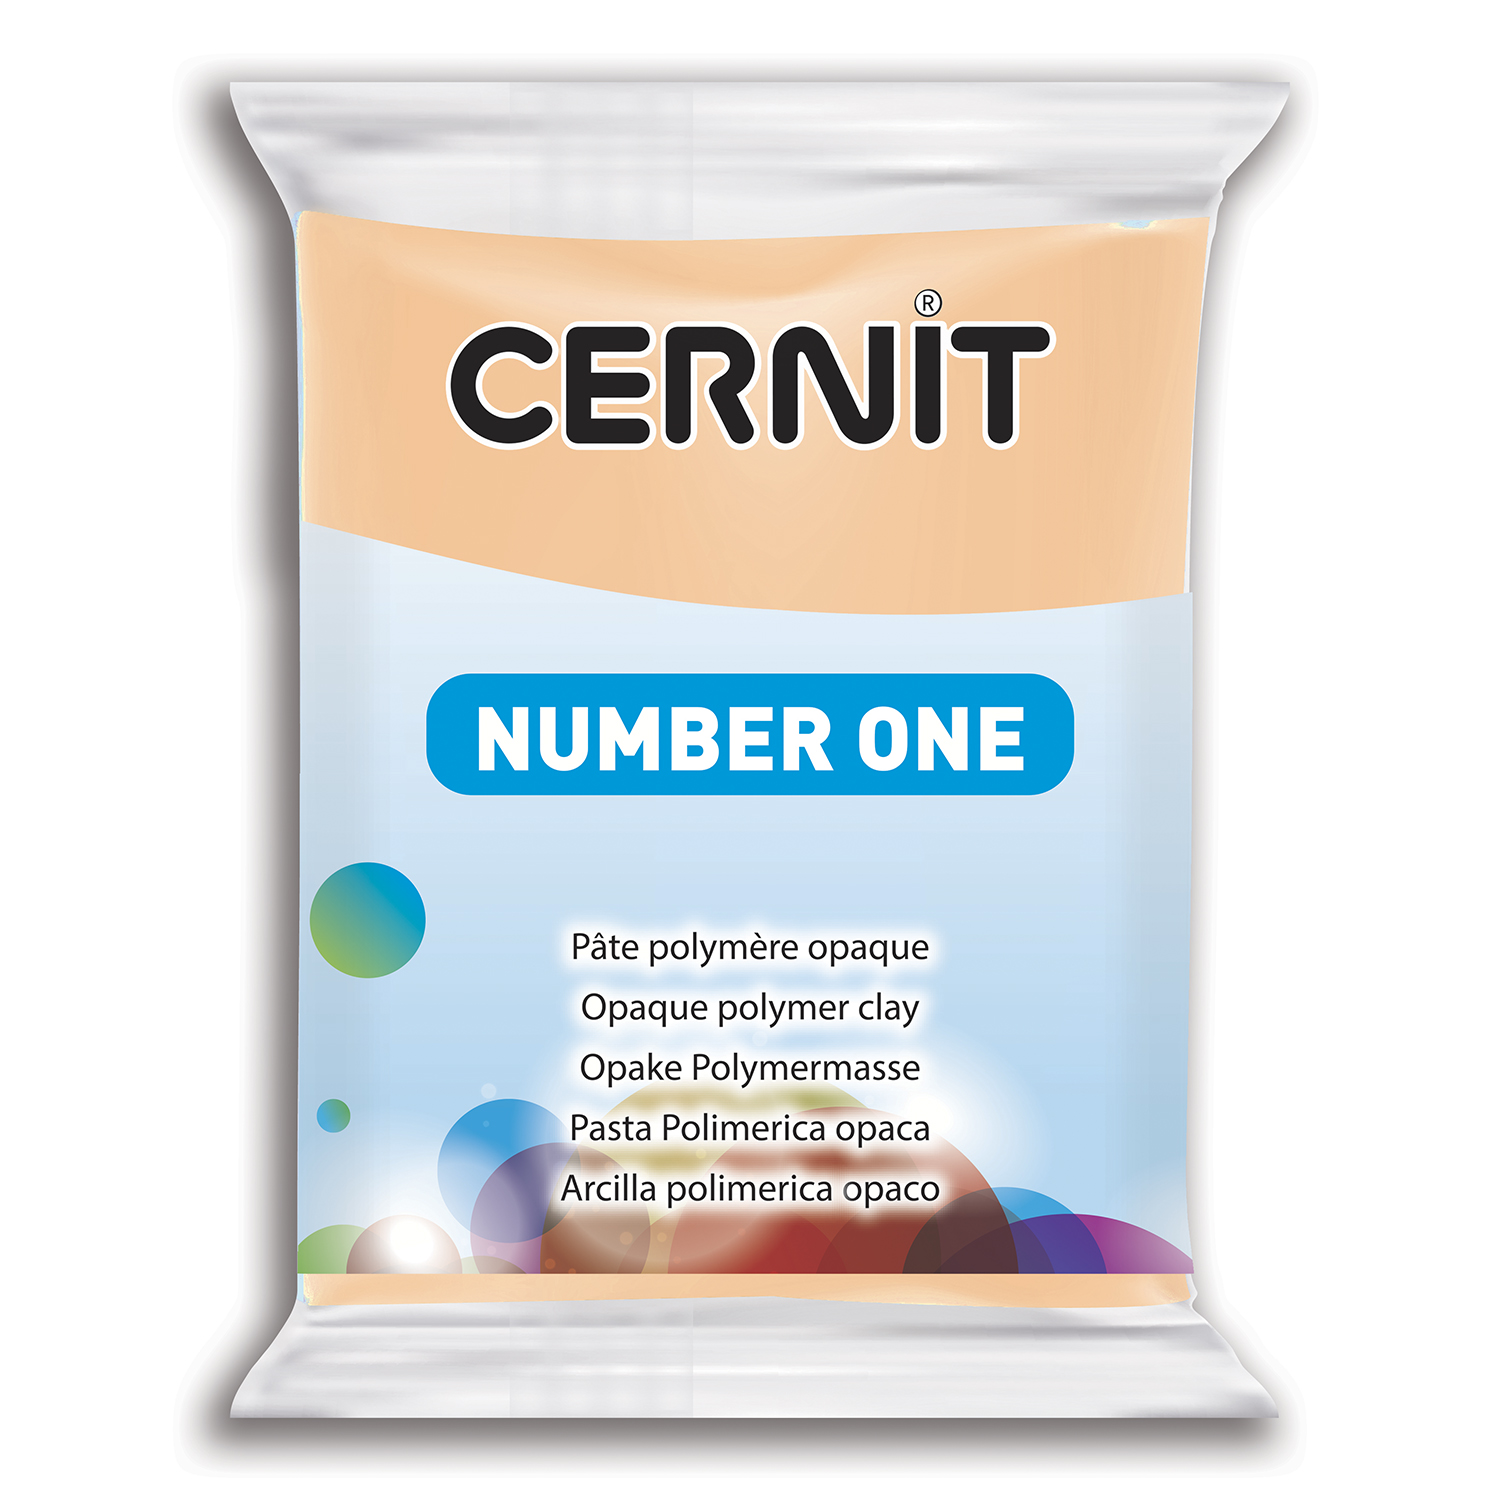 Cernit Number One 56g. Peche